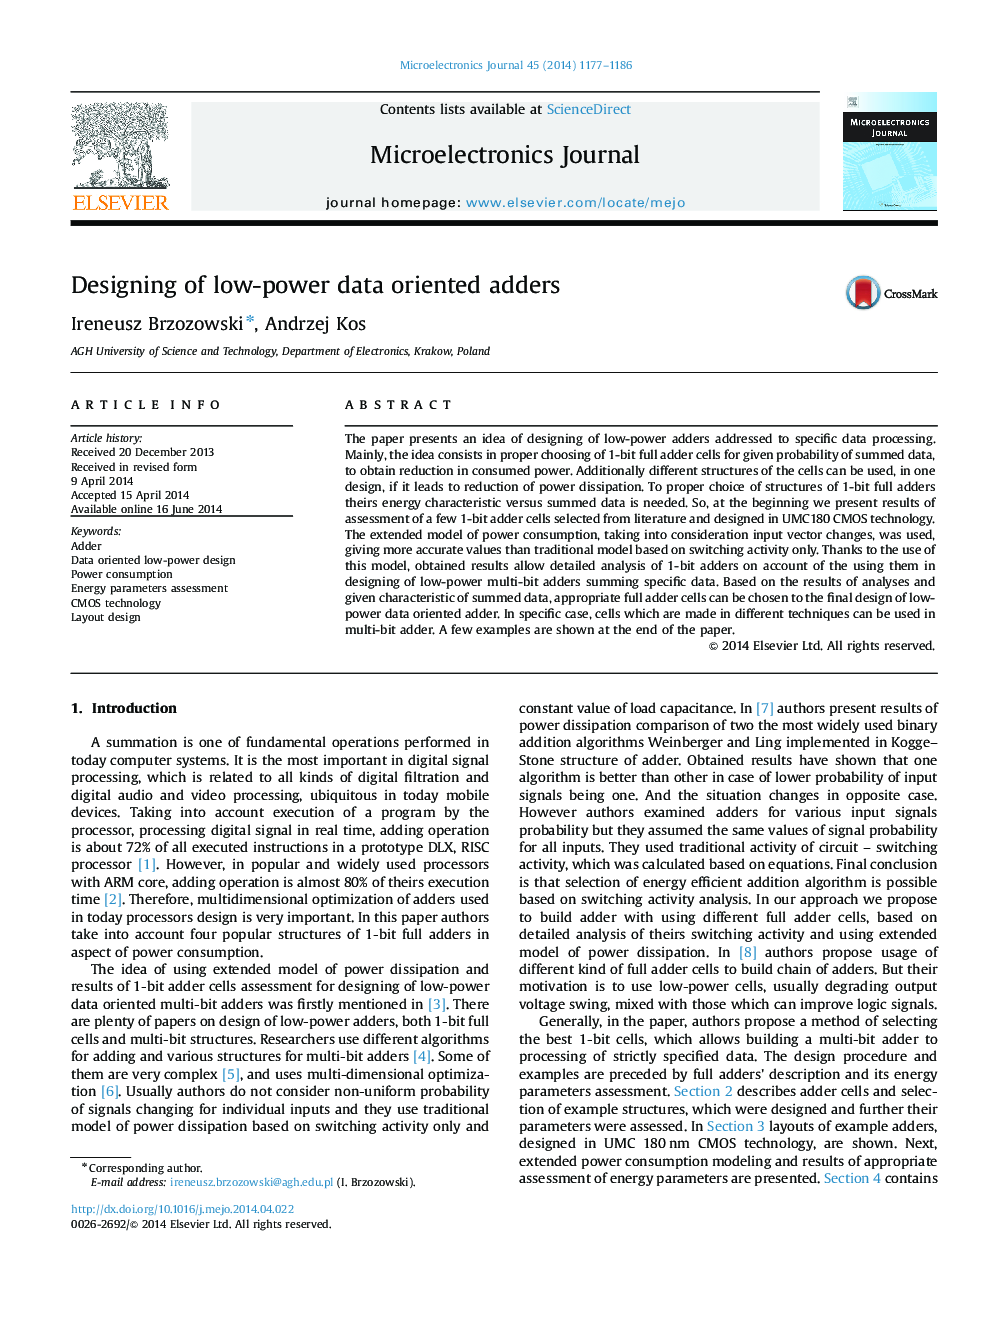 Designing of low-power data oriented adders